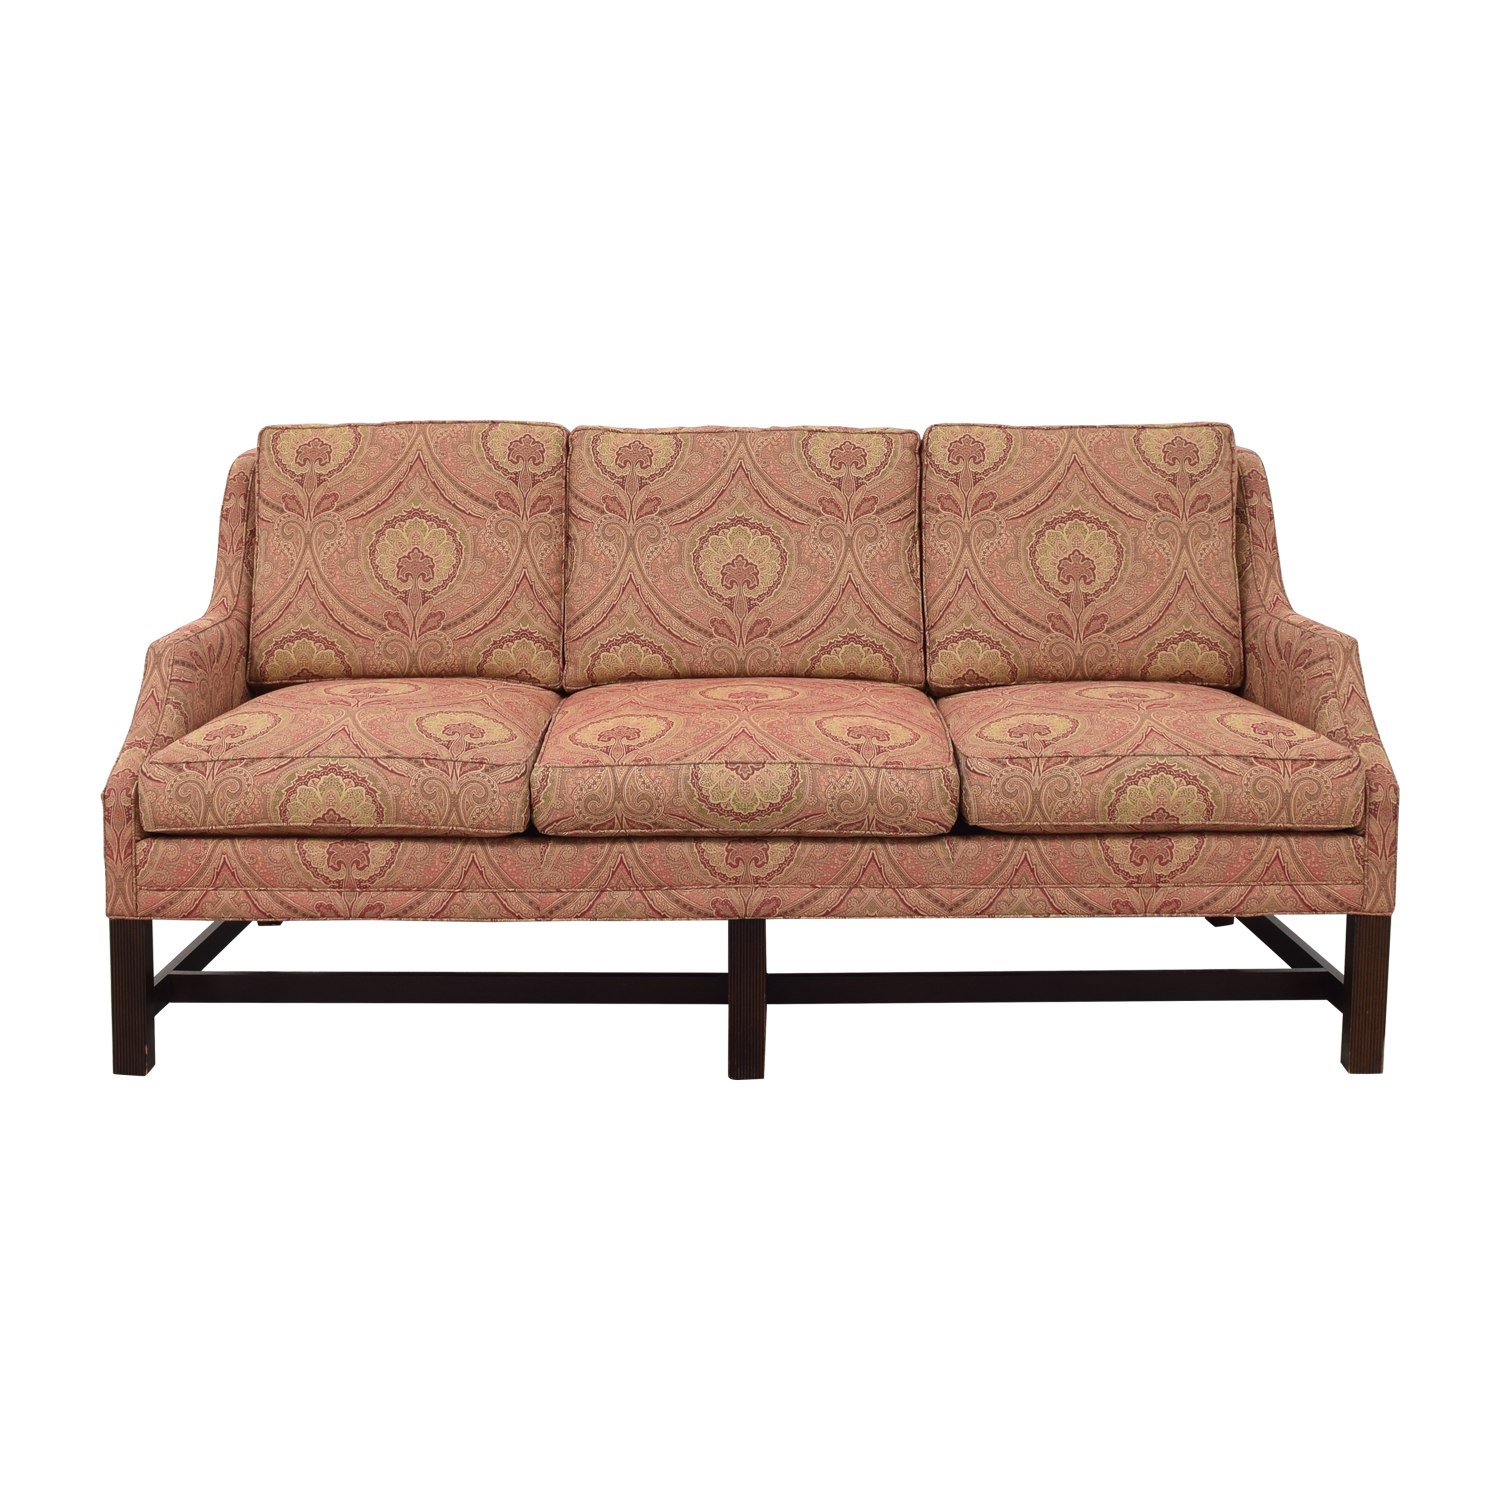 Old Hickory Tannery Executive 76L Chesterfield Sofa